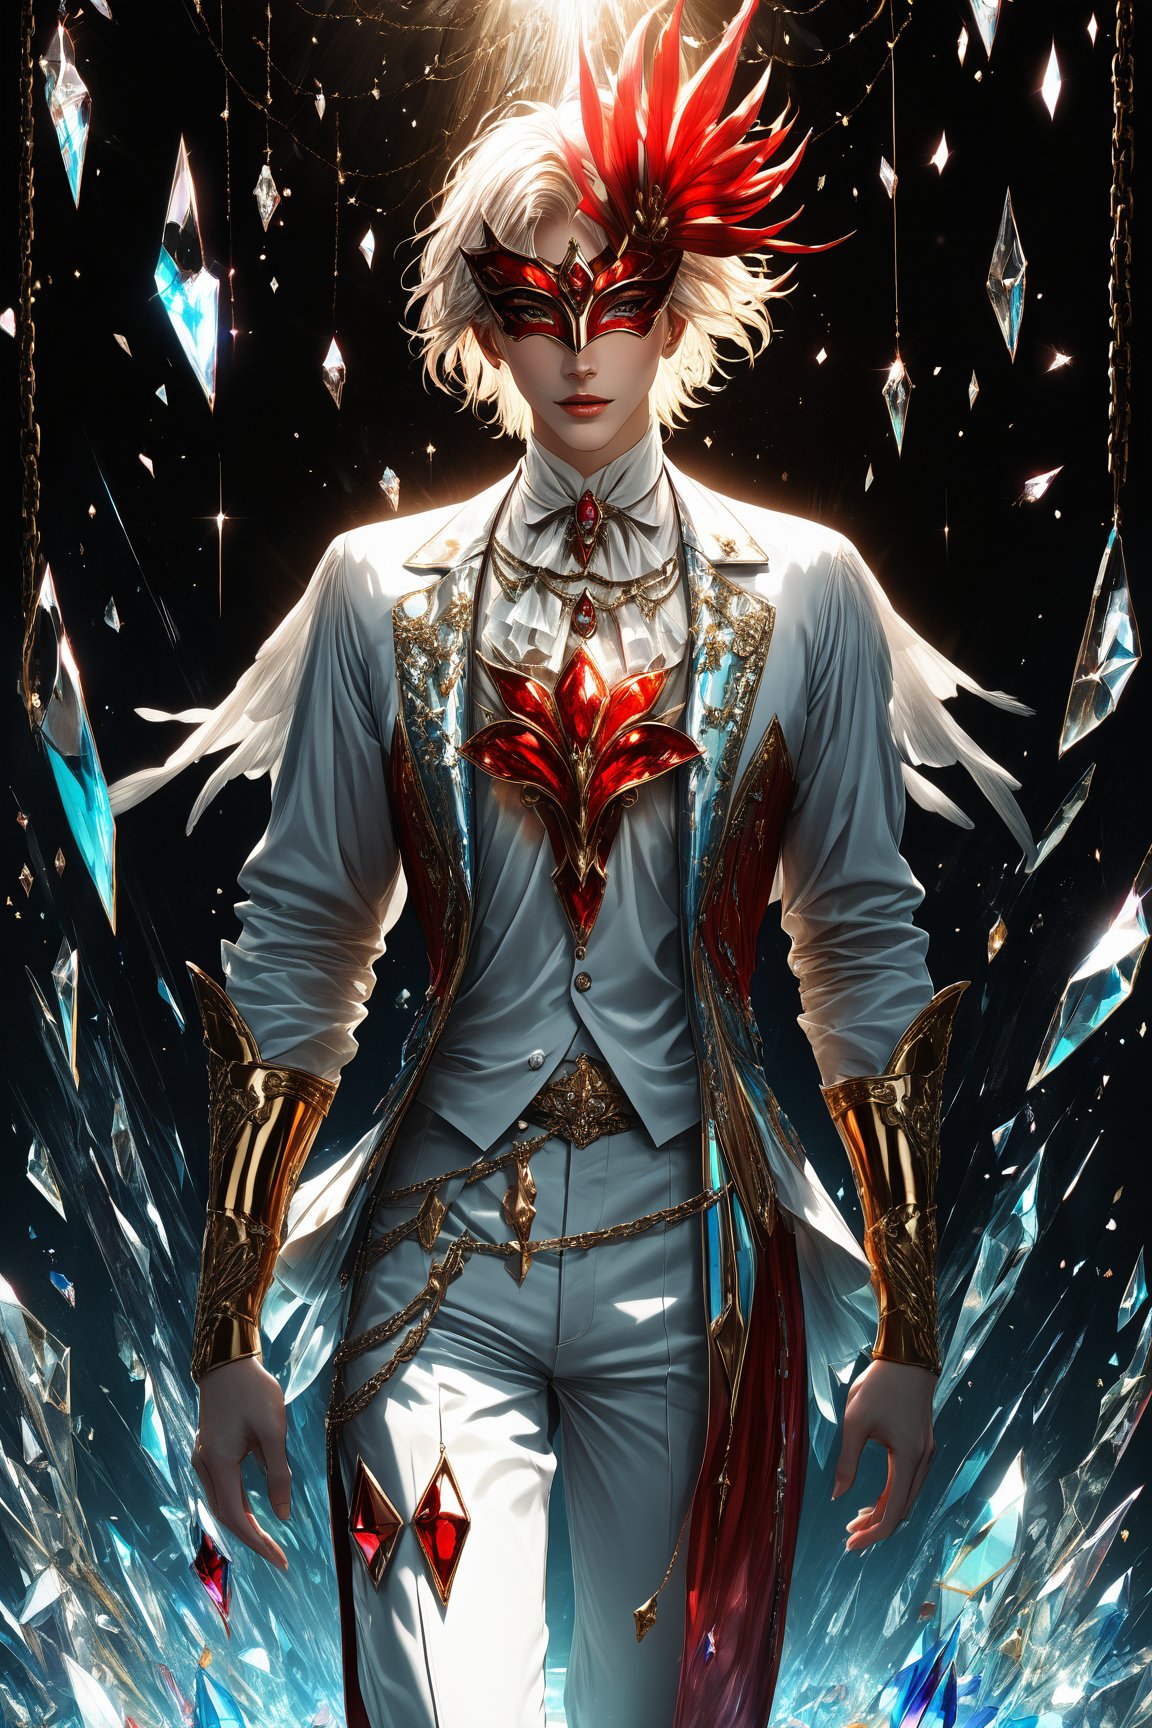 1boy, (fantasy masquerade mask), white short hair, (strait hair), (golden eyes), crimson red fantasy-inspired broken glass shards suit, eye-covering masculine mask, crystal, chains, ((Broken Glass effect)), no background, clean shave, stunning, something that even doesn't exist, mythical being, energy, textures, iridescent and luminescent shards, divine presence, cowboy shot, Volumetric light, auras, rays, vivid colors reflects, Broken Glass effect, eyes shoot, oil paint, male focus, 3d render, digital art, realistic